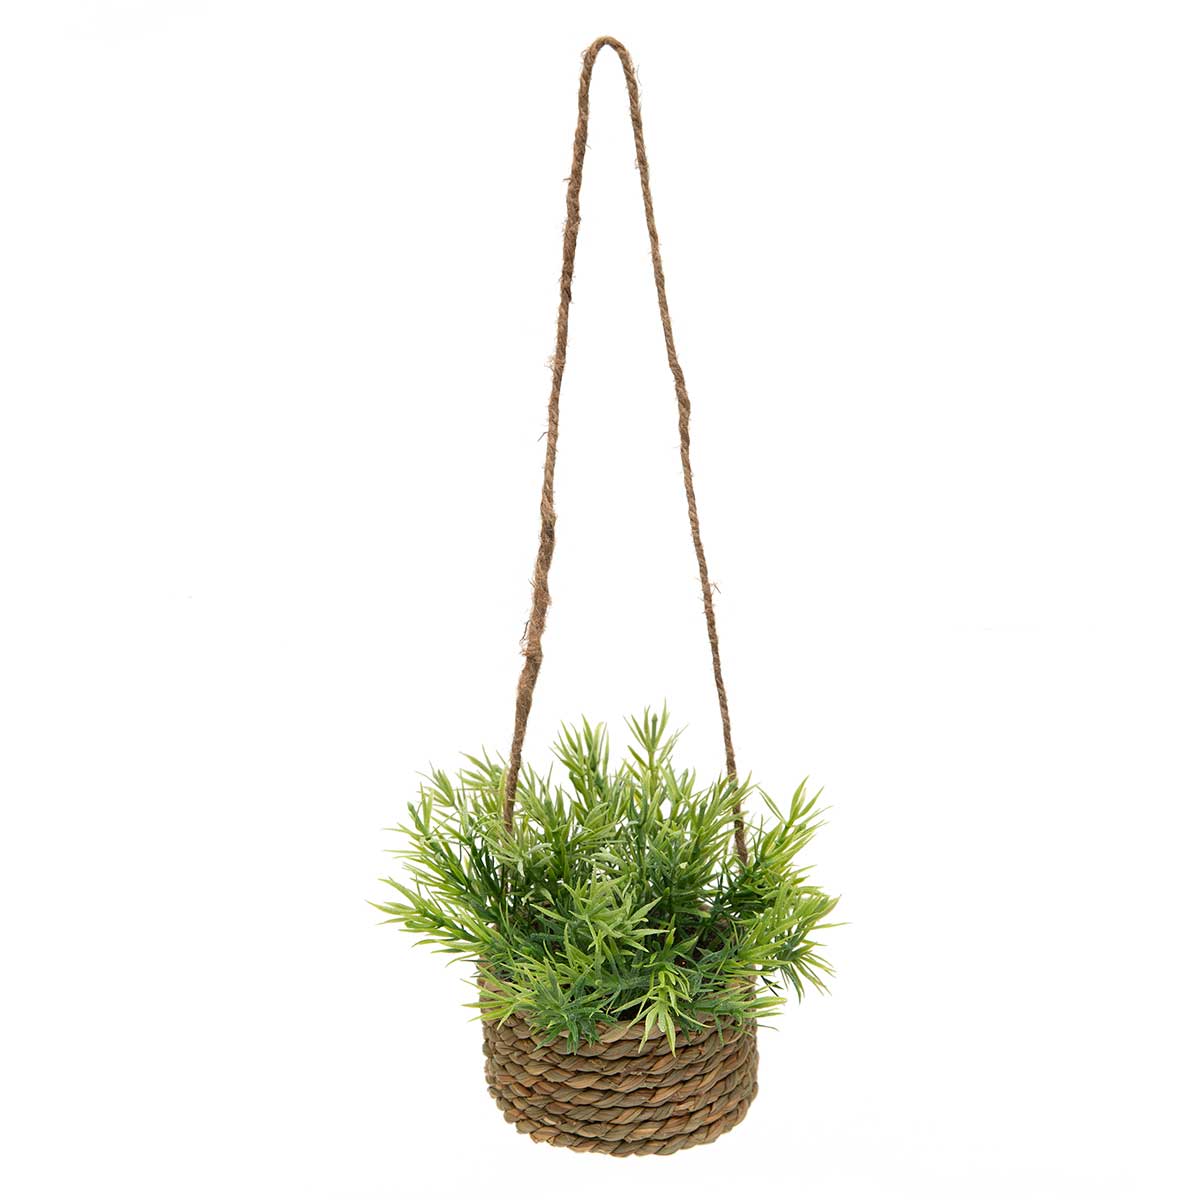 ROSEMARY IN BASKET 5IN X 4.5IN WITH TWINE HANGER